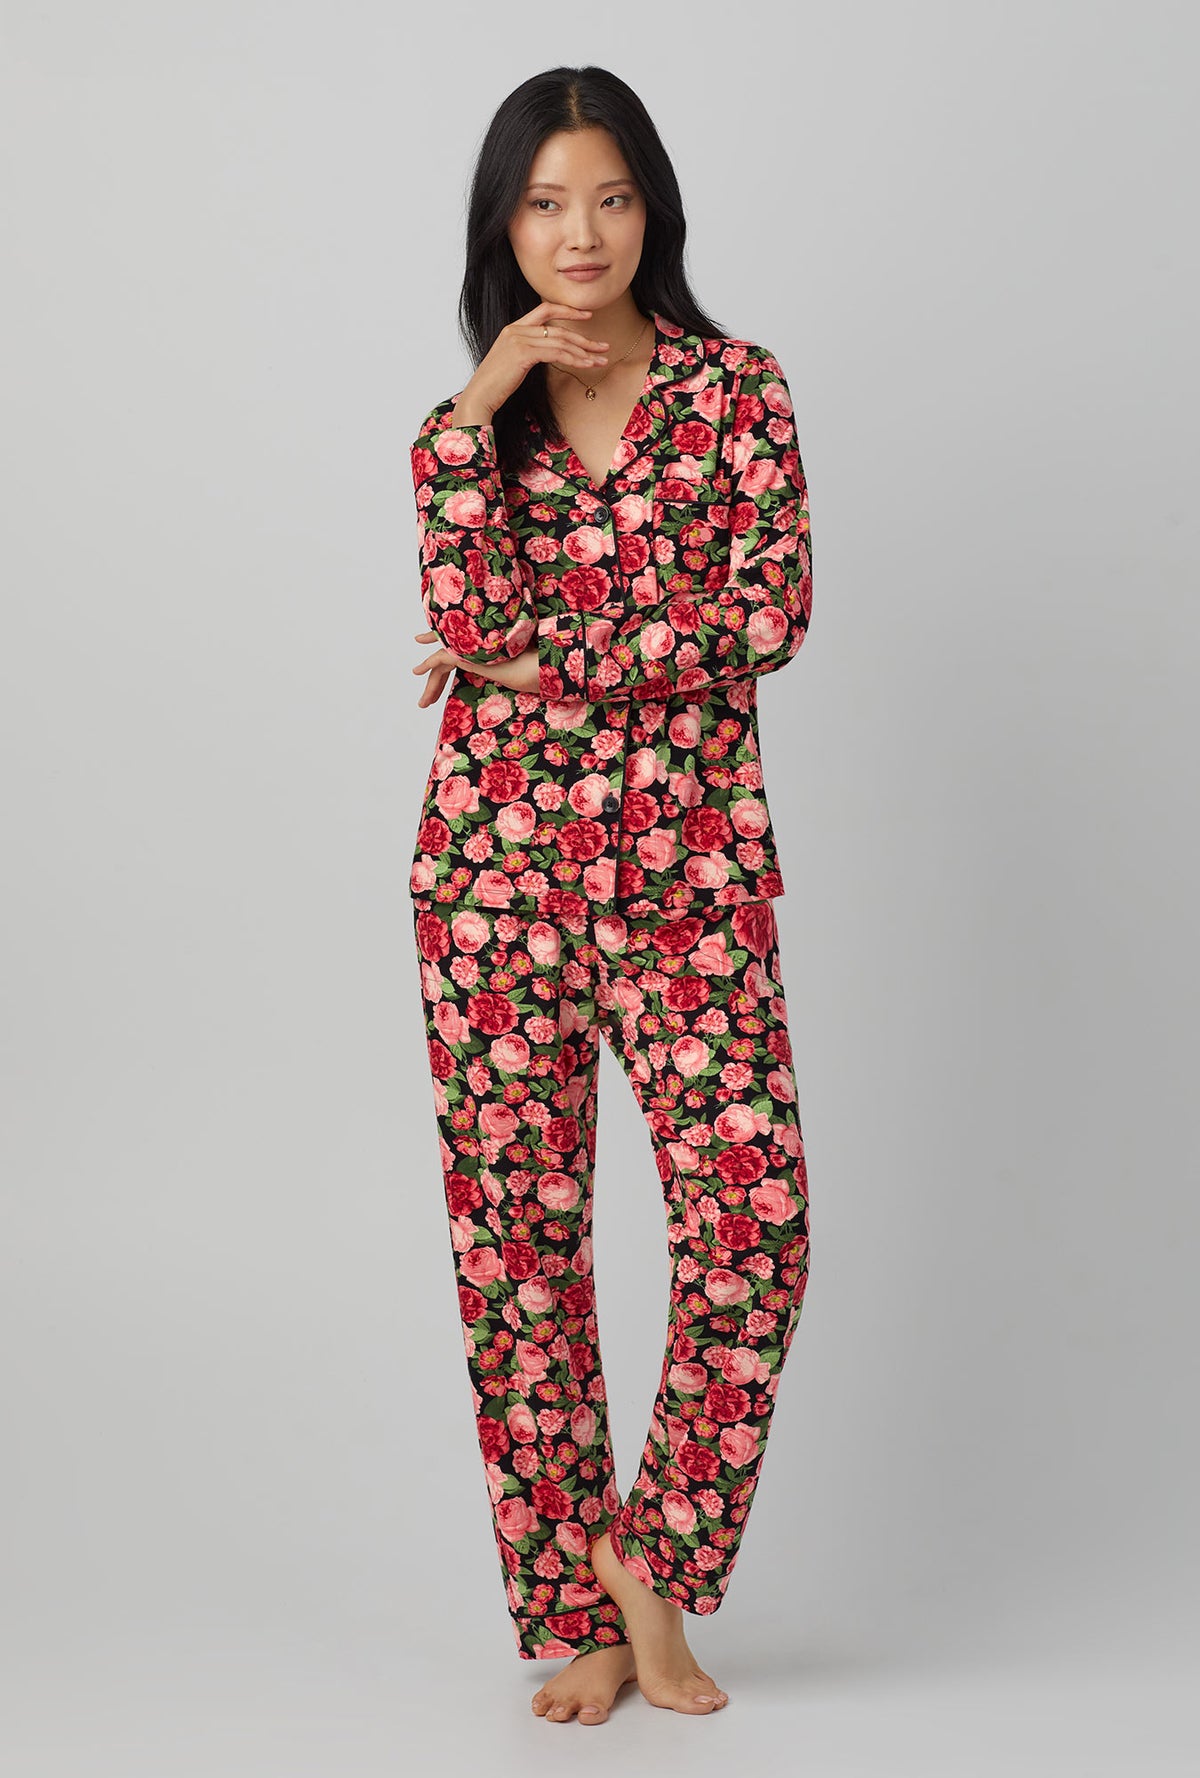 A lady wearing  Long Sleeve Classic Stretch Jersey PJ Set with Roses are Red print